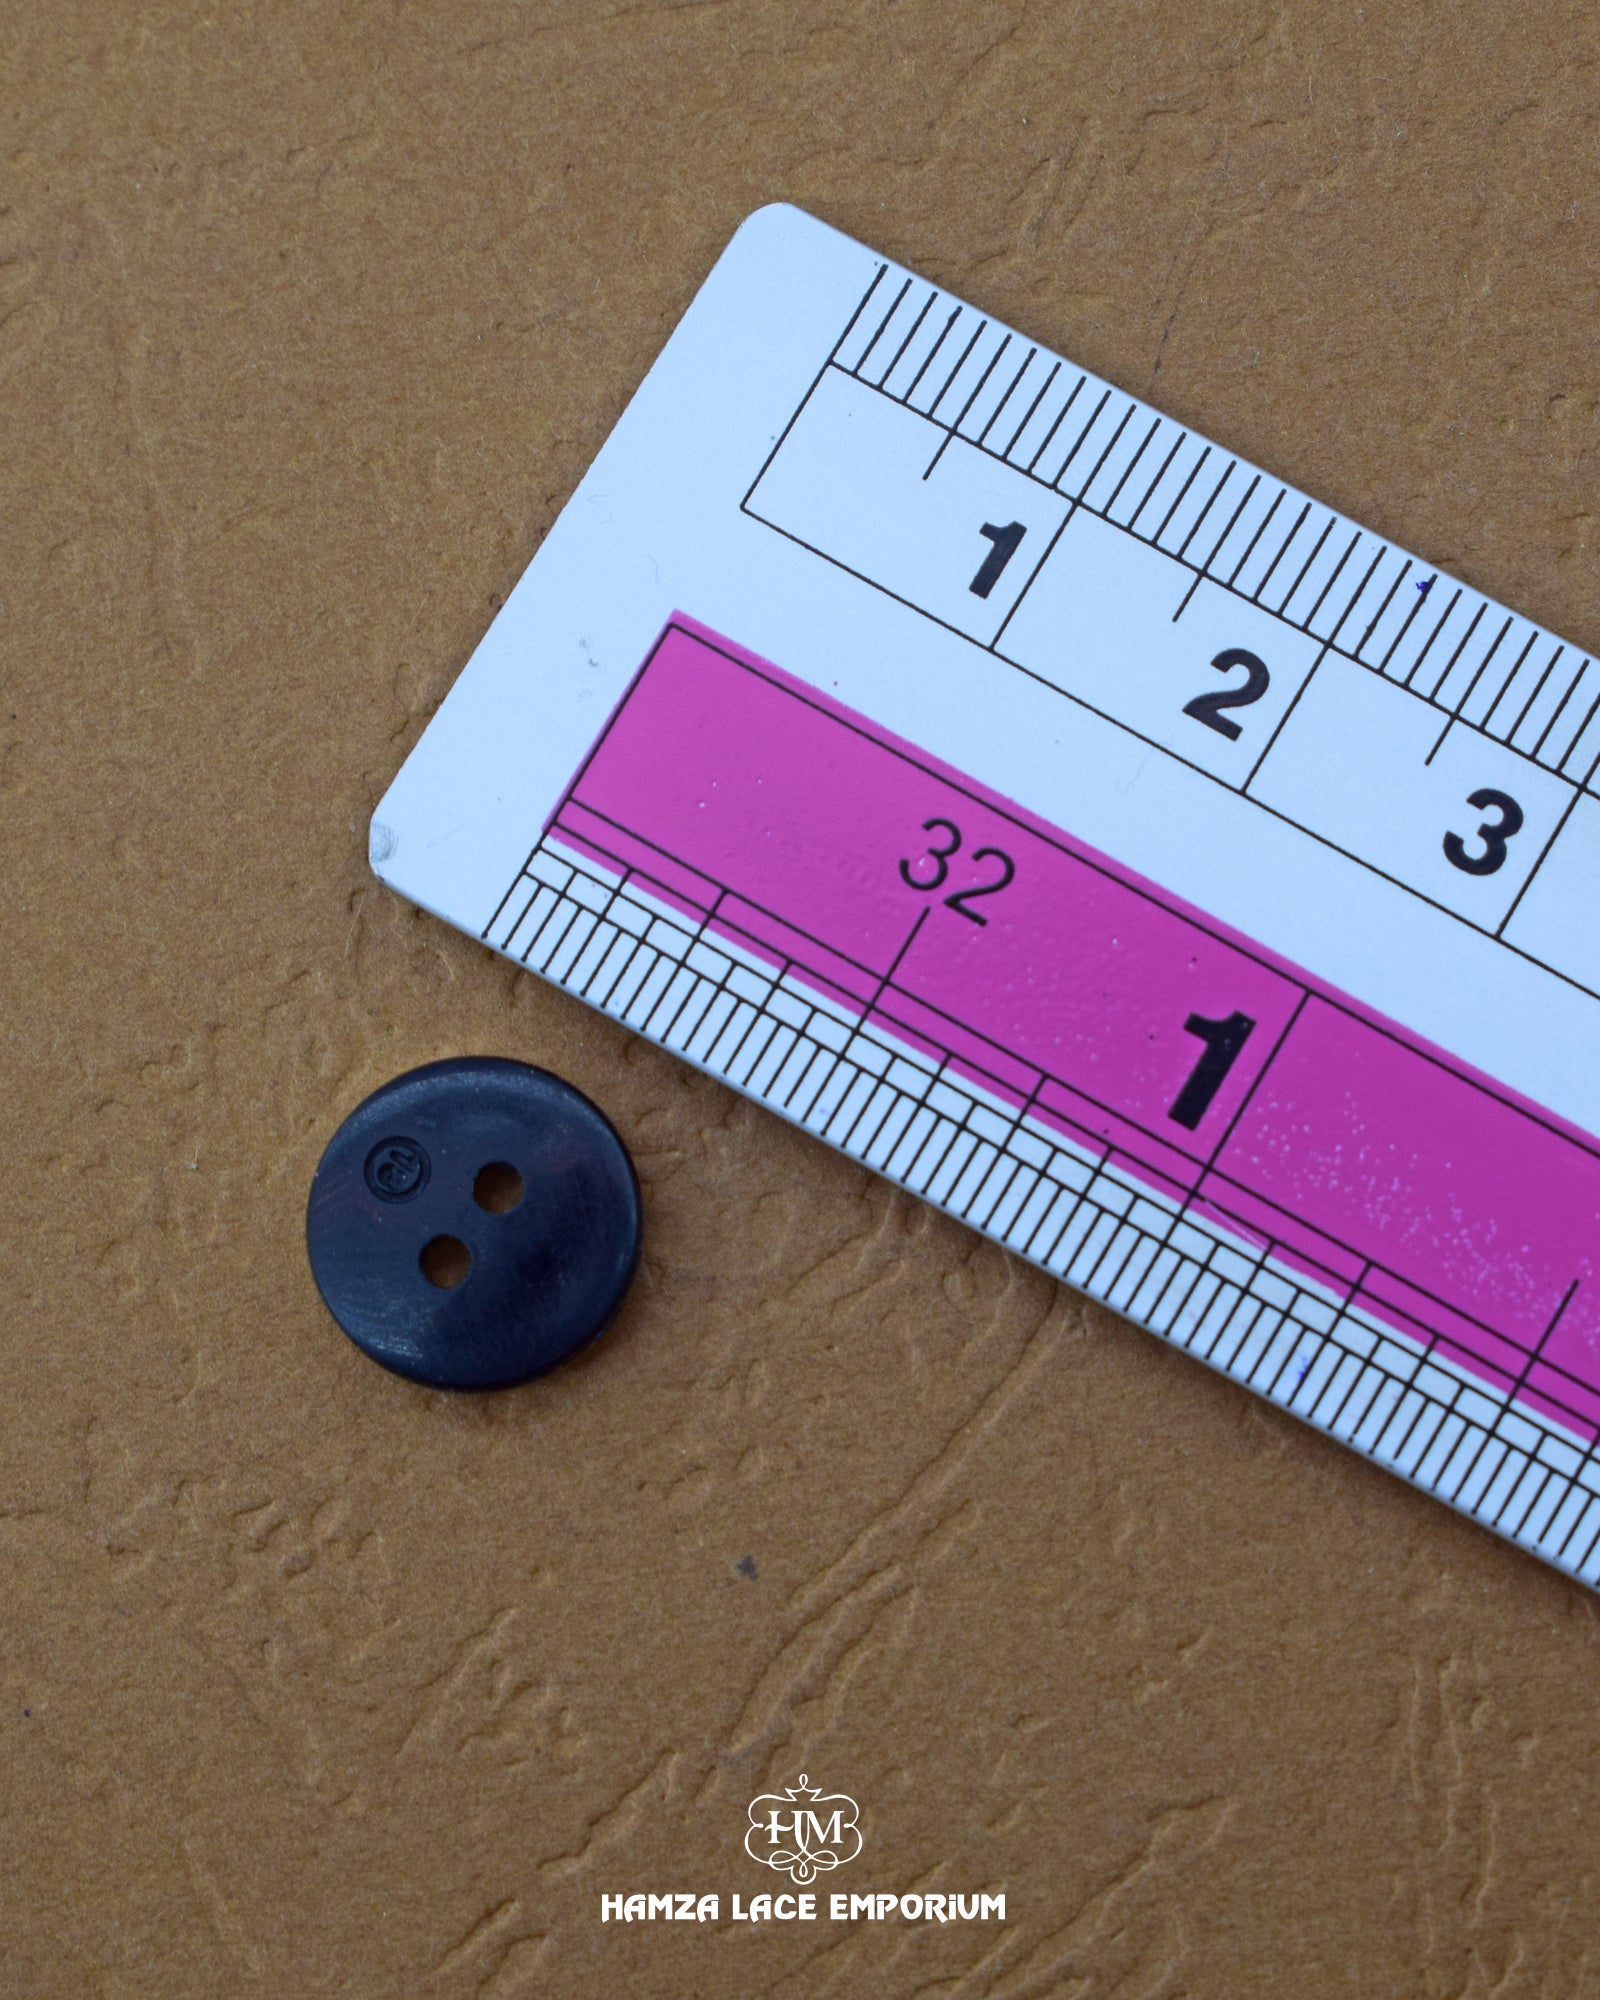 Size of the 'Round Shape Plastic Button MB853' is given with the help of a ruler